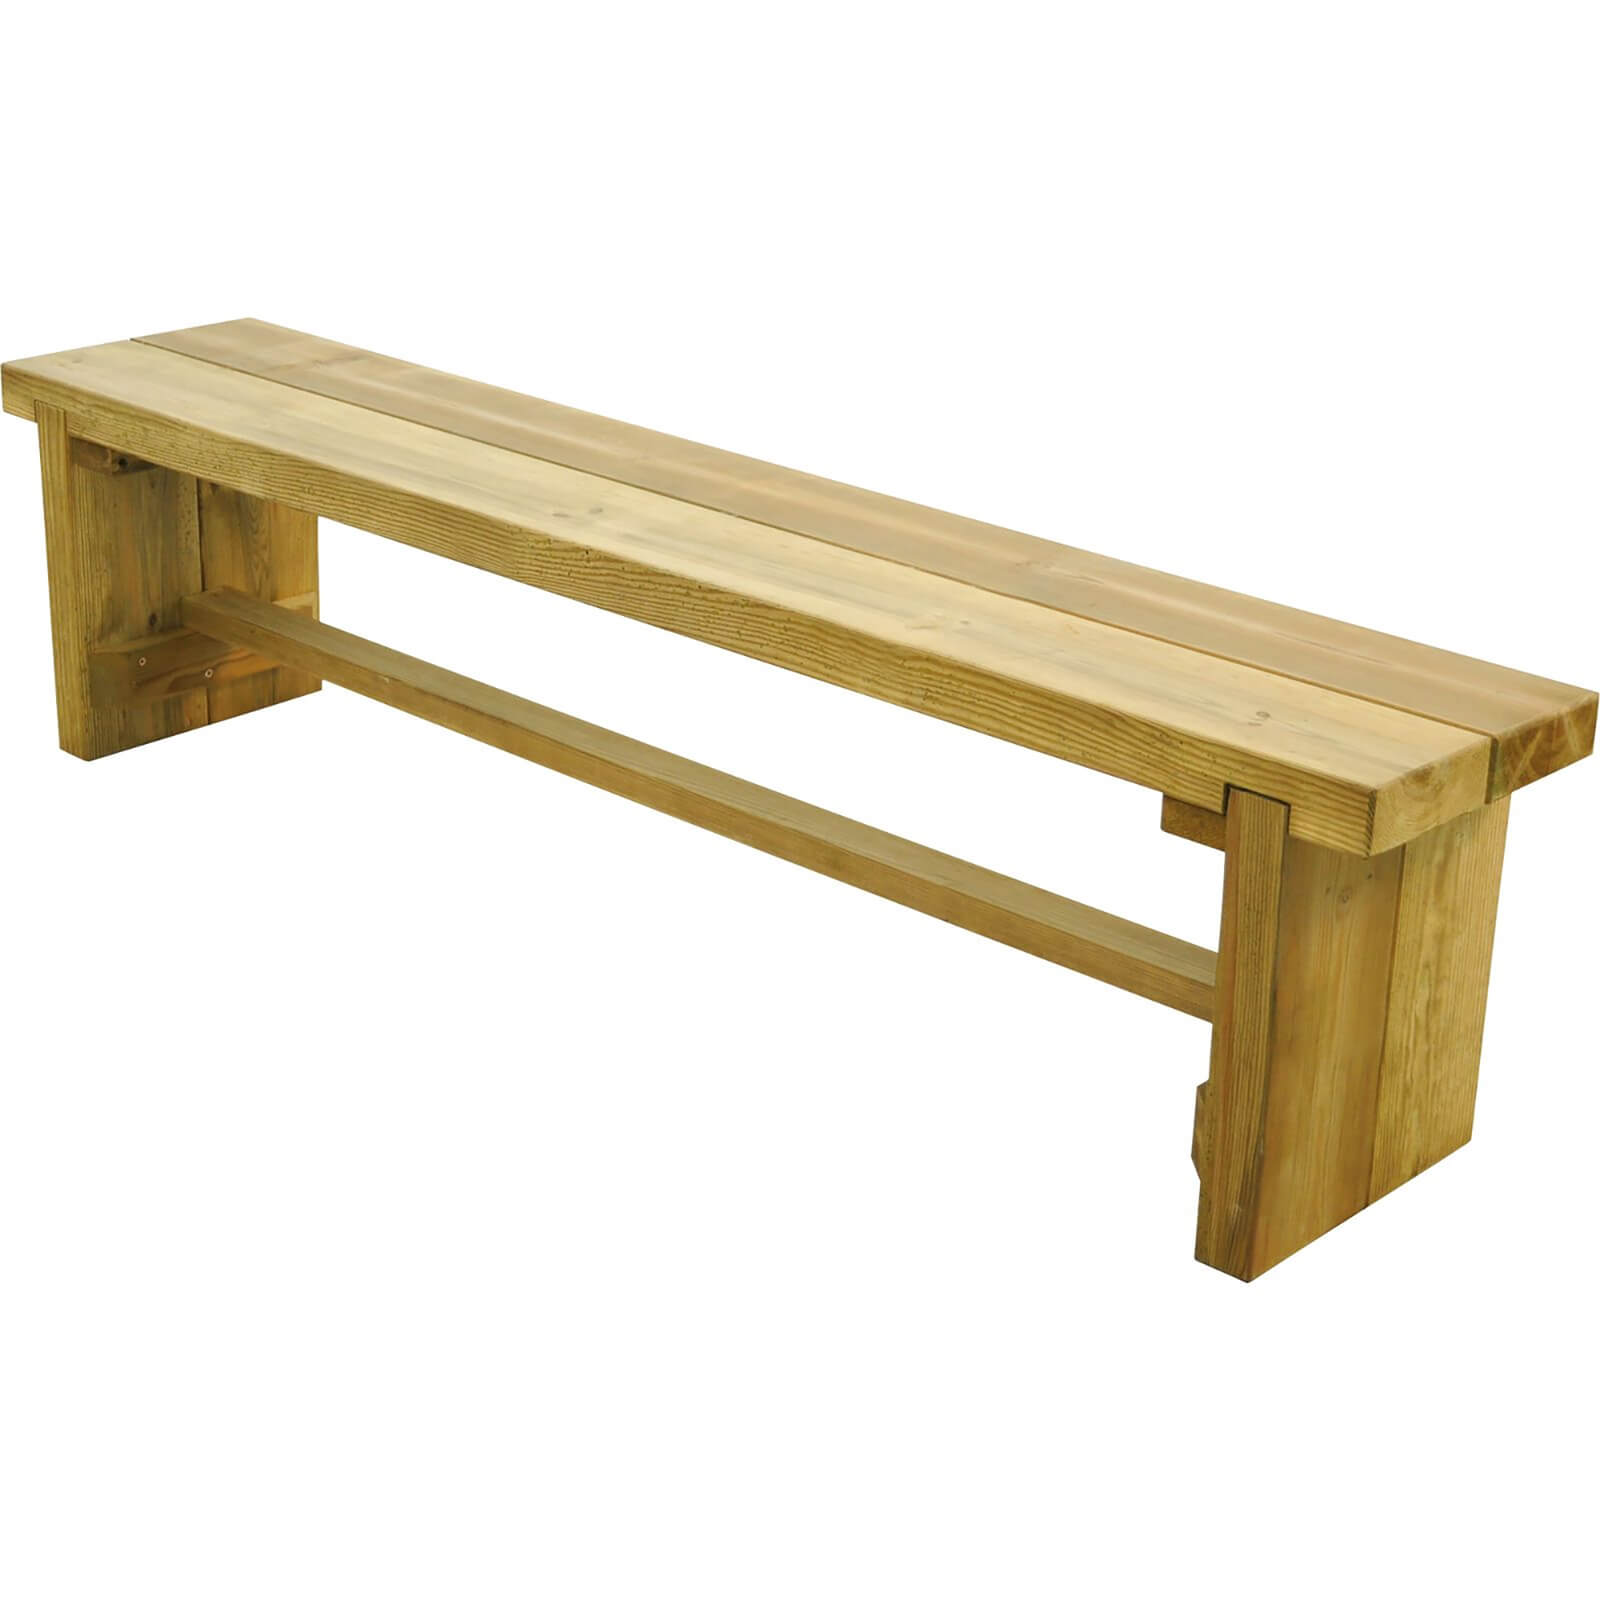 Forest Double Wooden Sleeper Bench - 1.8m